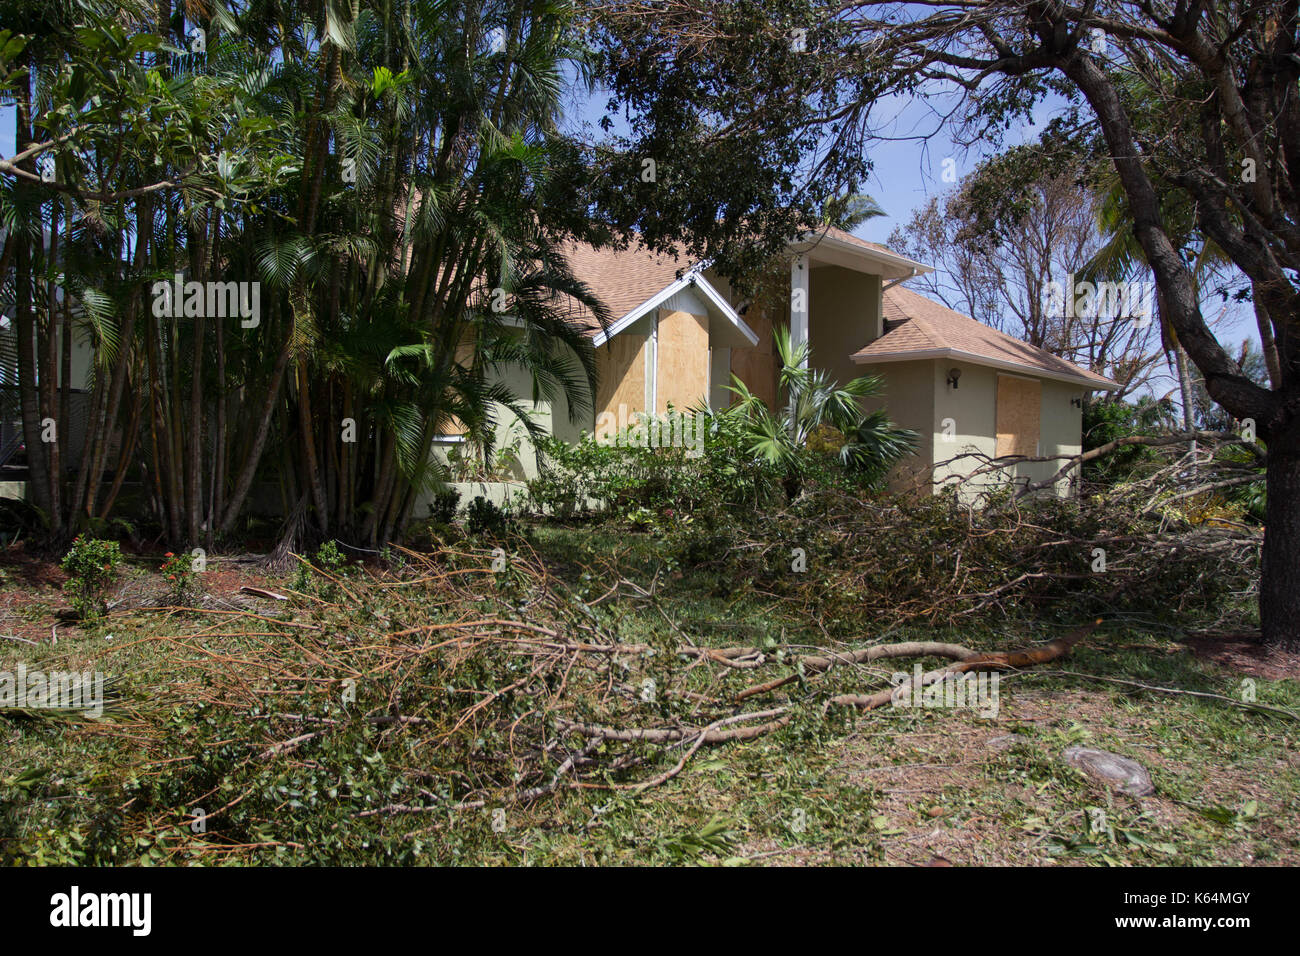 Miami, Florida, USA. 11th Sep, 2017. Scene of destruction by Hurricane Irma in Marco Island, FL, as seen Monday, Setepmber 11, 2017. The storm made its second landfall here after ravaging the Florida Keys. Credit: Michael Candelori/Alamy Live News Stock Photo